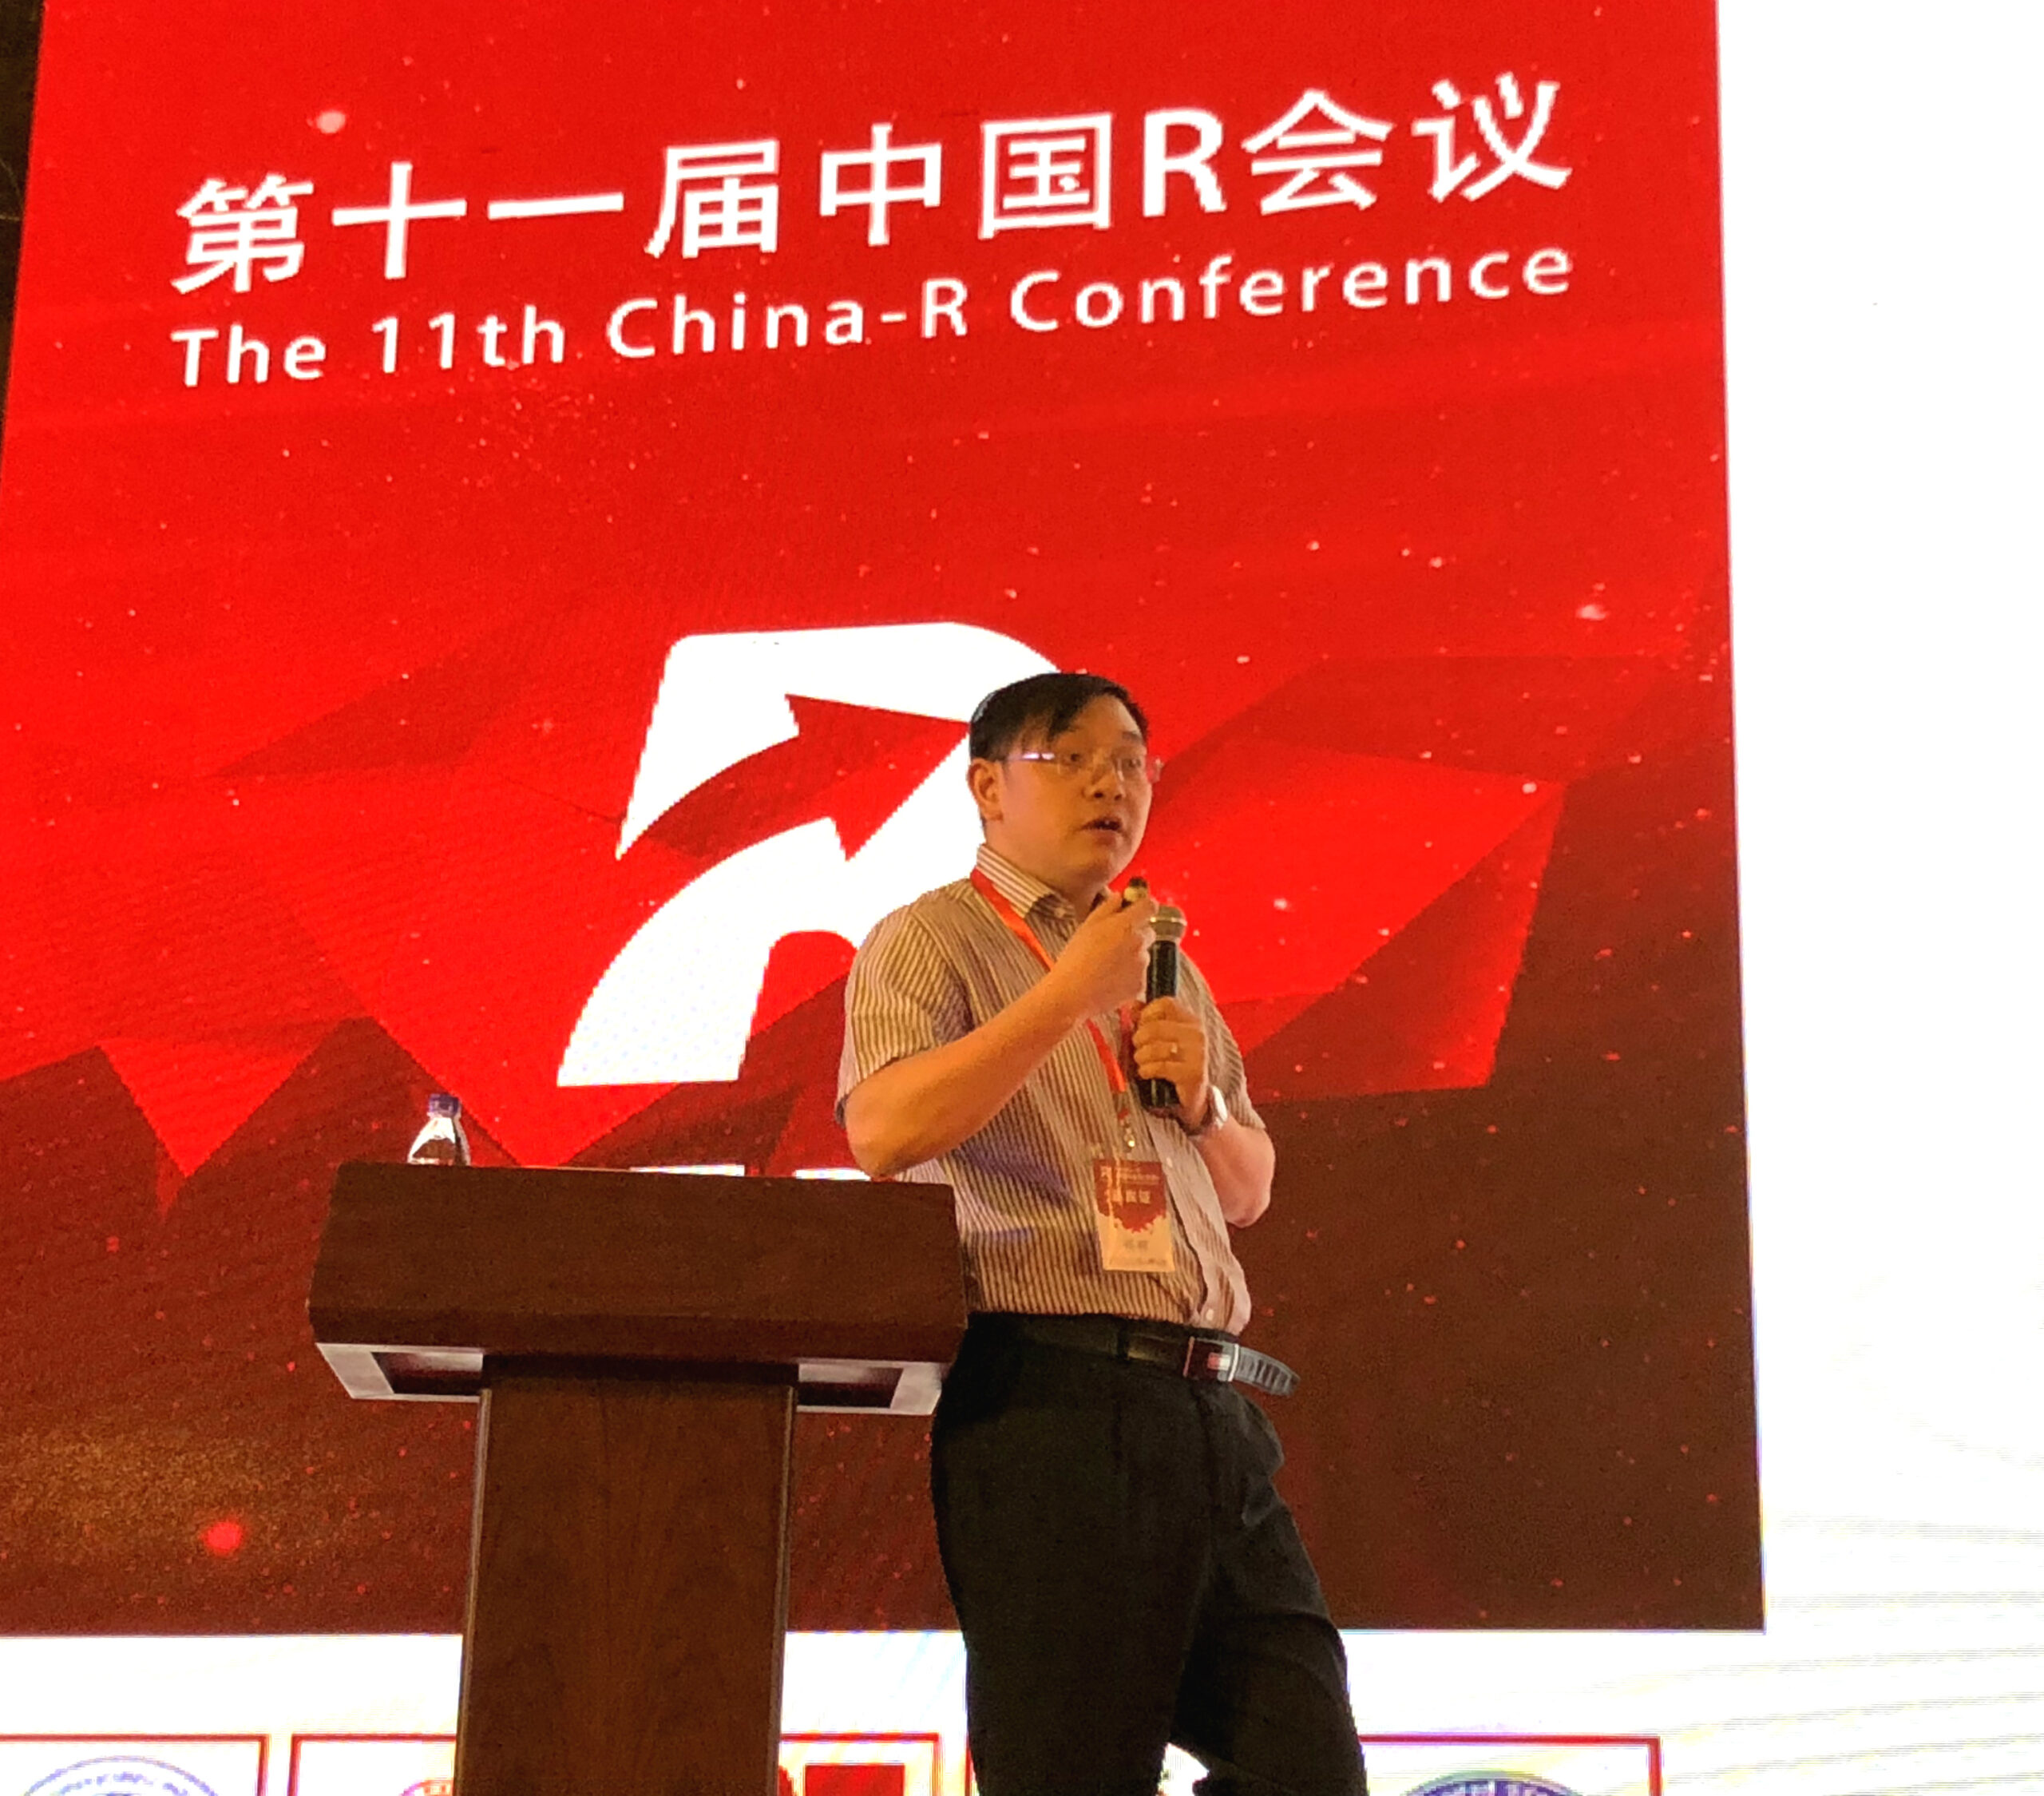 Prof. Ke Deng was Invited by The 11th China-R Conference and gave a talk